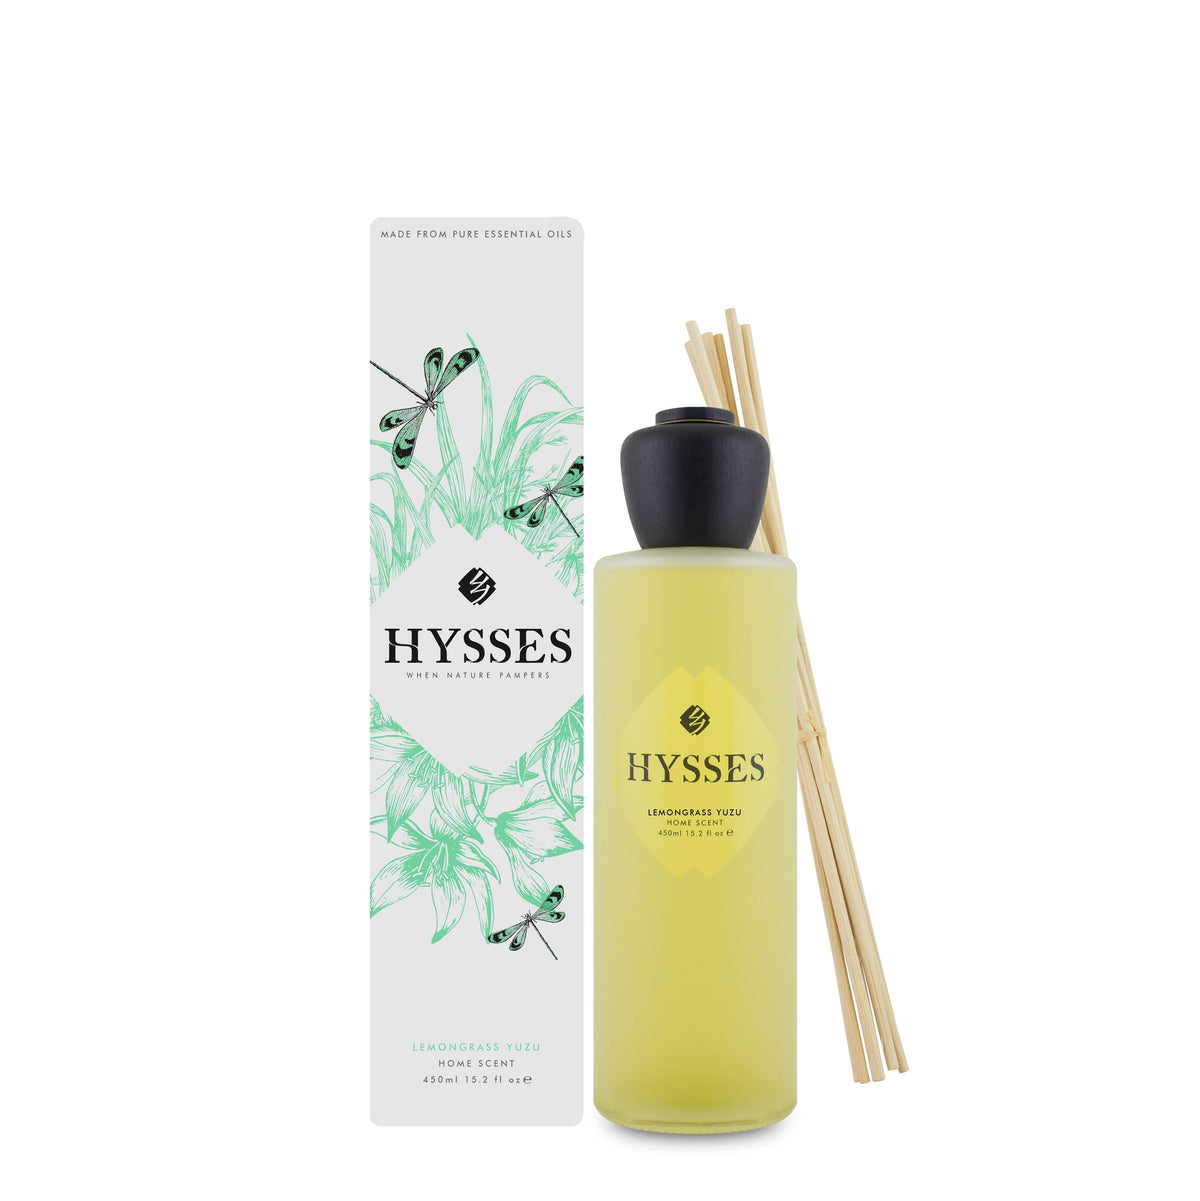 Hysses Home Scents 450ml Home Scent Reed Diffuser Lemongrass Yuzu